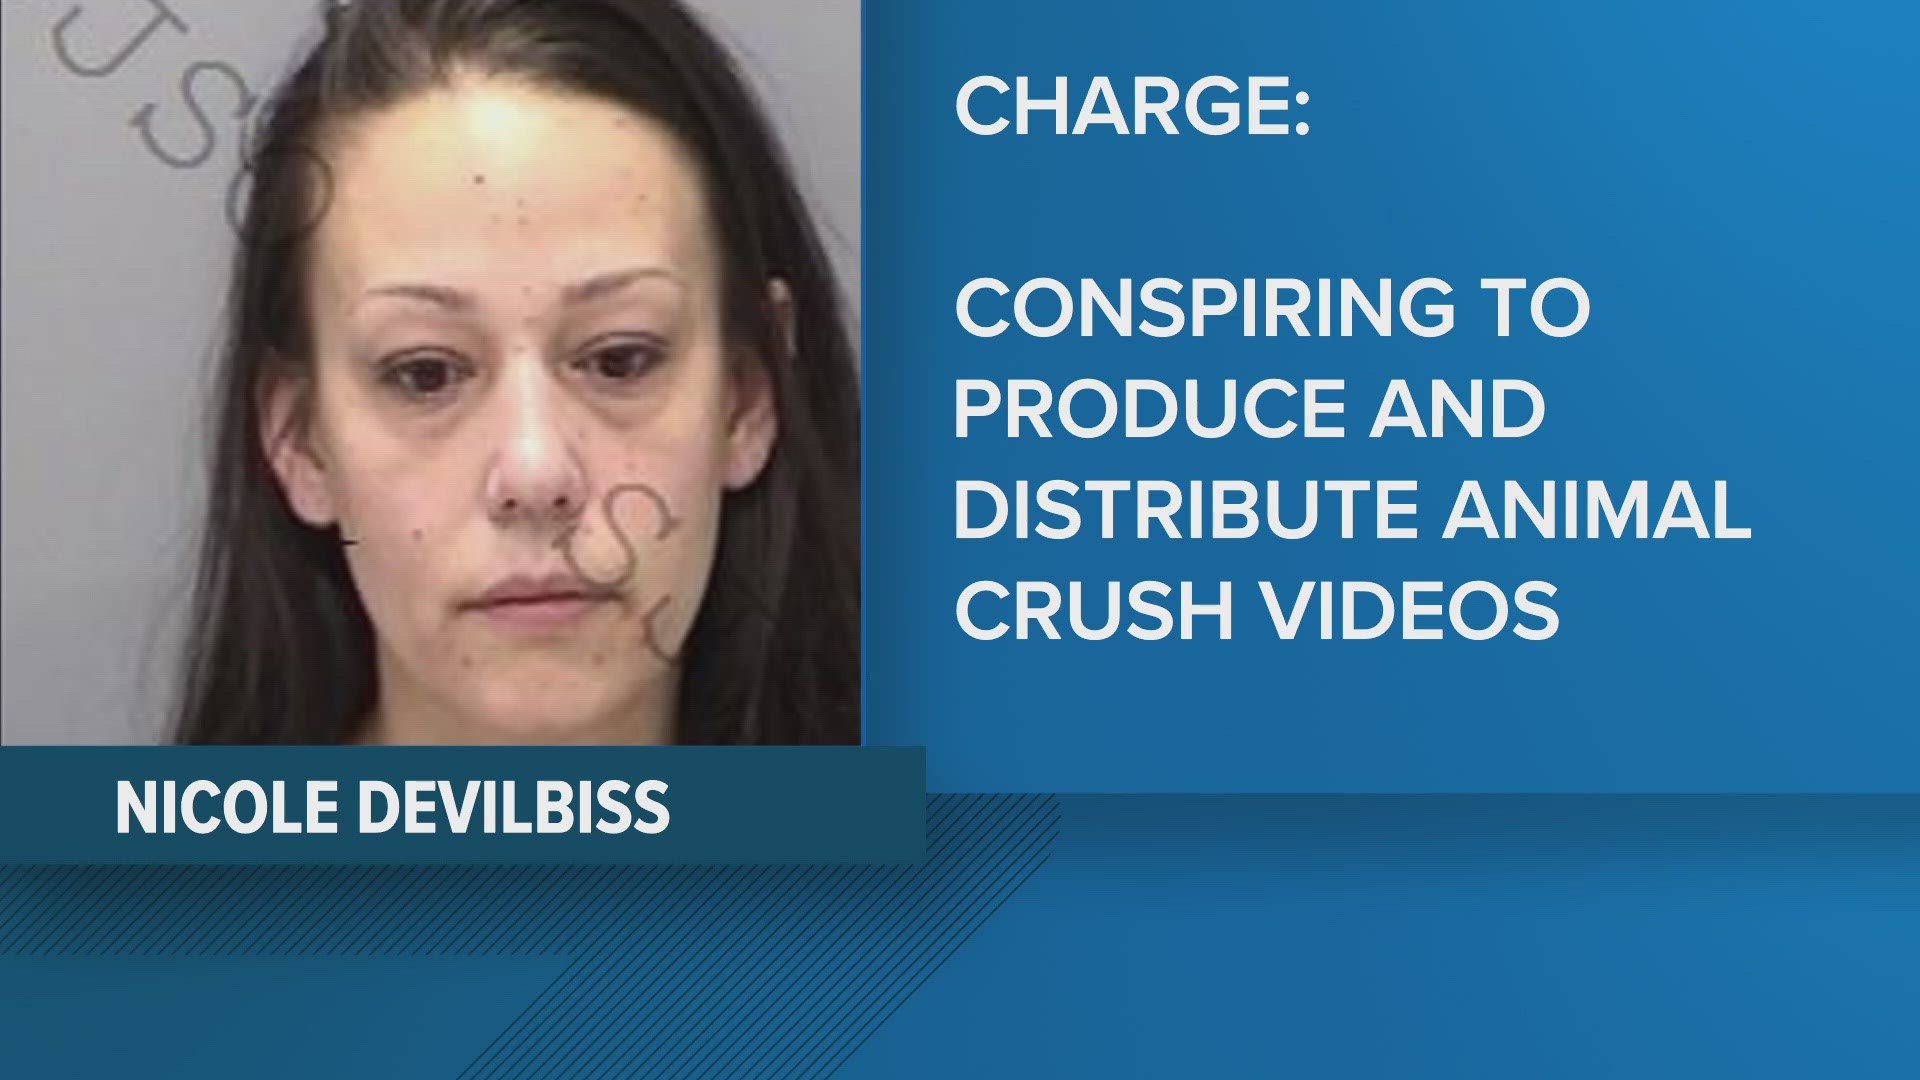 Nicole Devilbiss, 35, was an administrator on an online group chat that was "dedicated to the abuse, torture, and death of monkeys," court documents state.